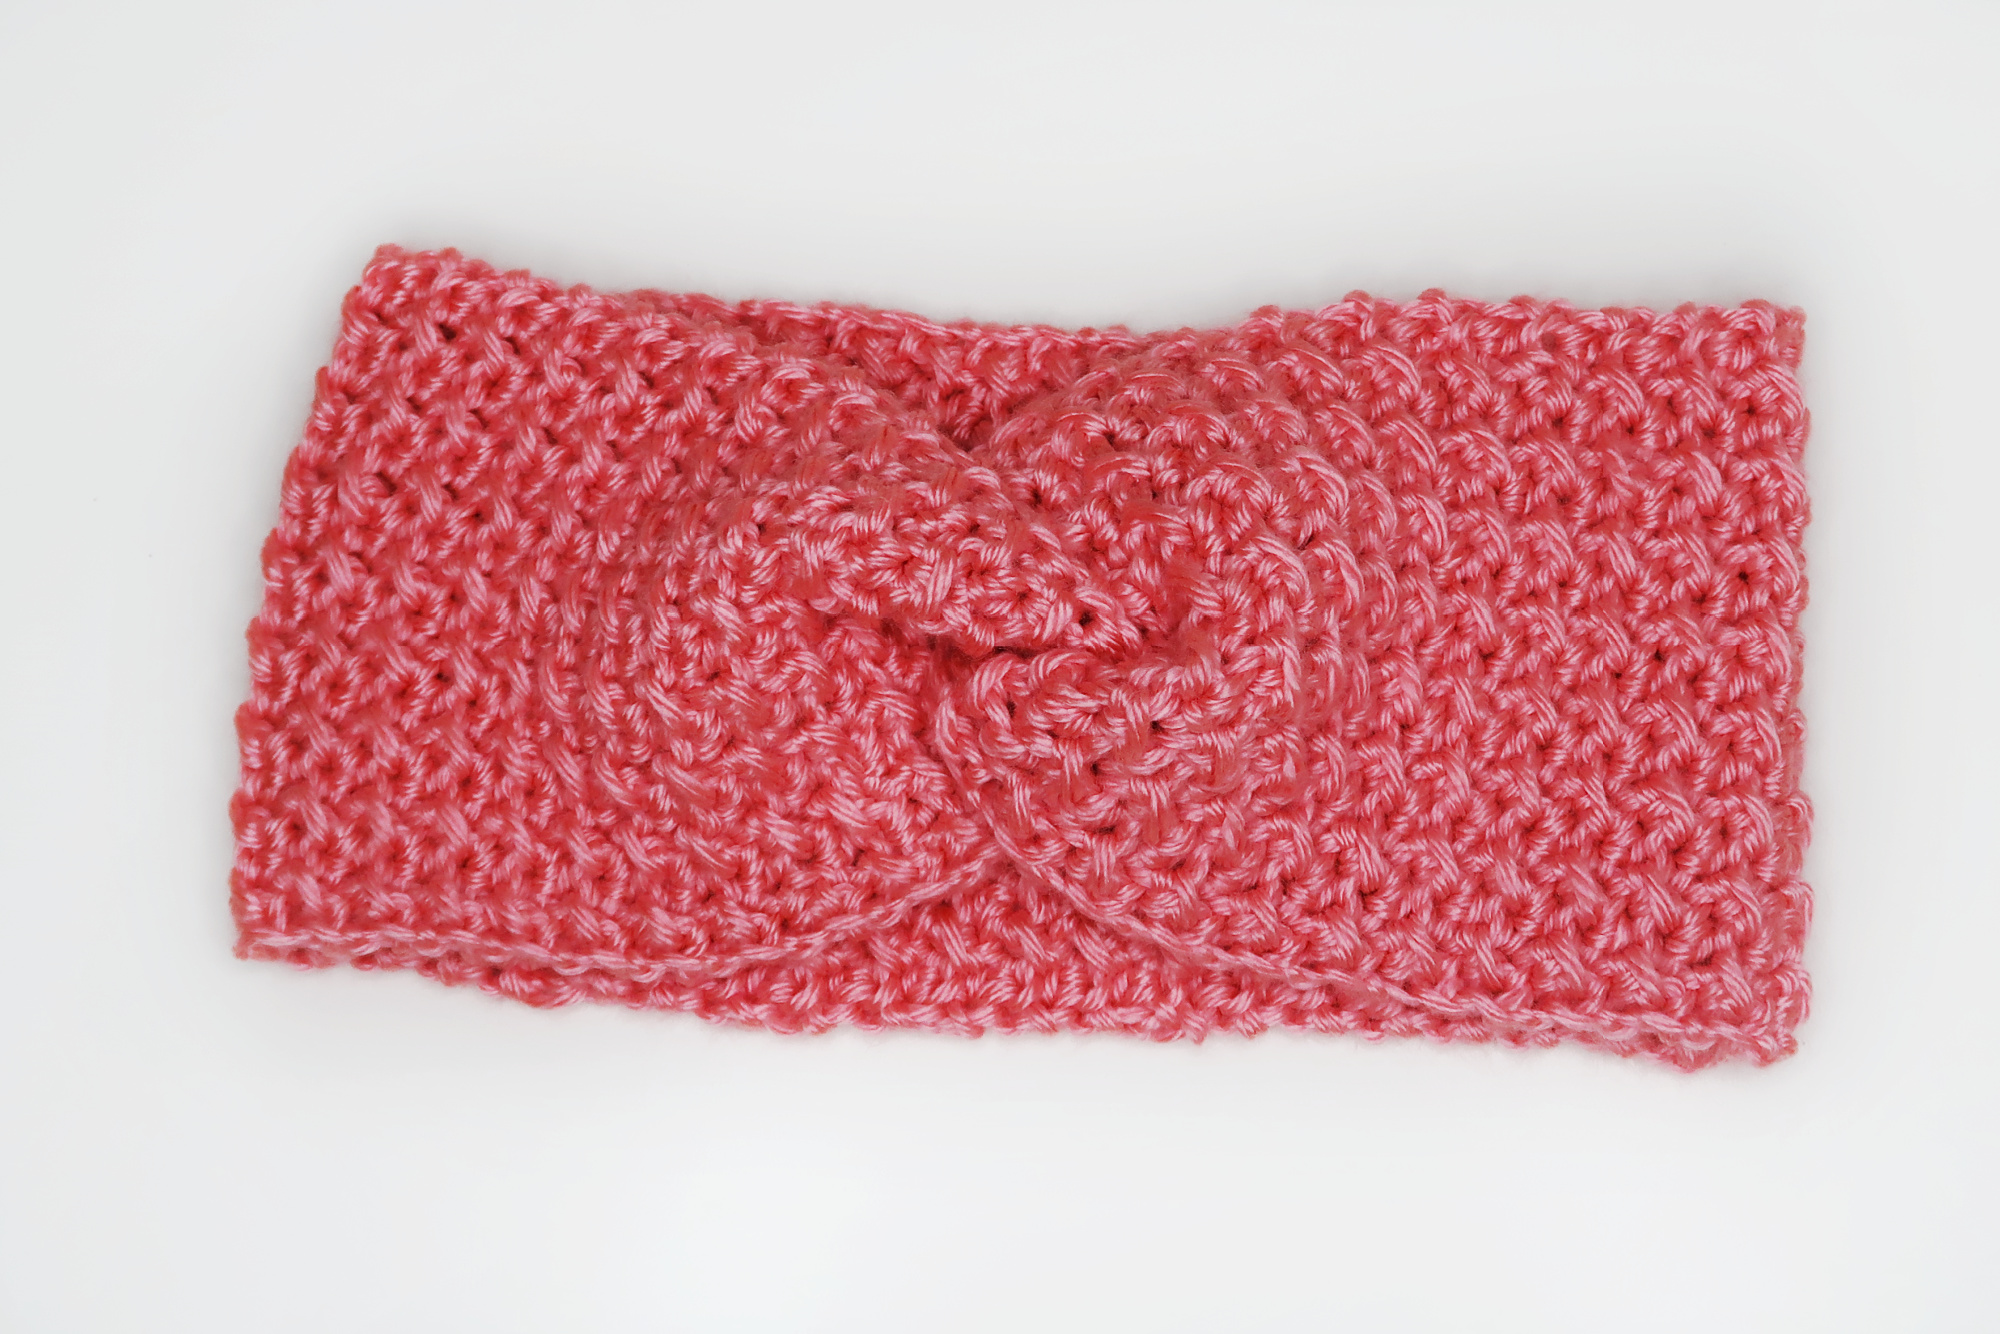 Crochet Crunch Stitch Headband Pattern - Looped and Knotted